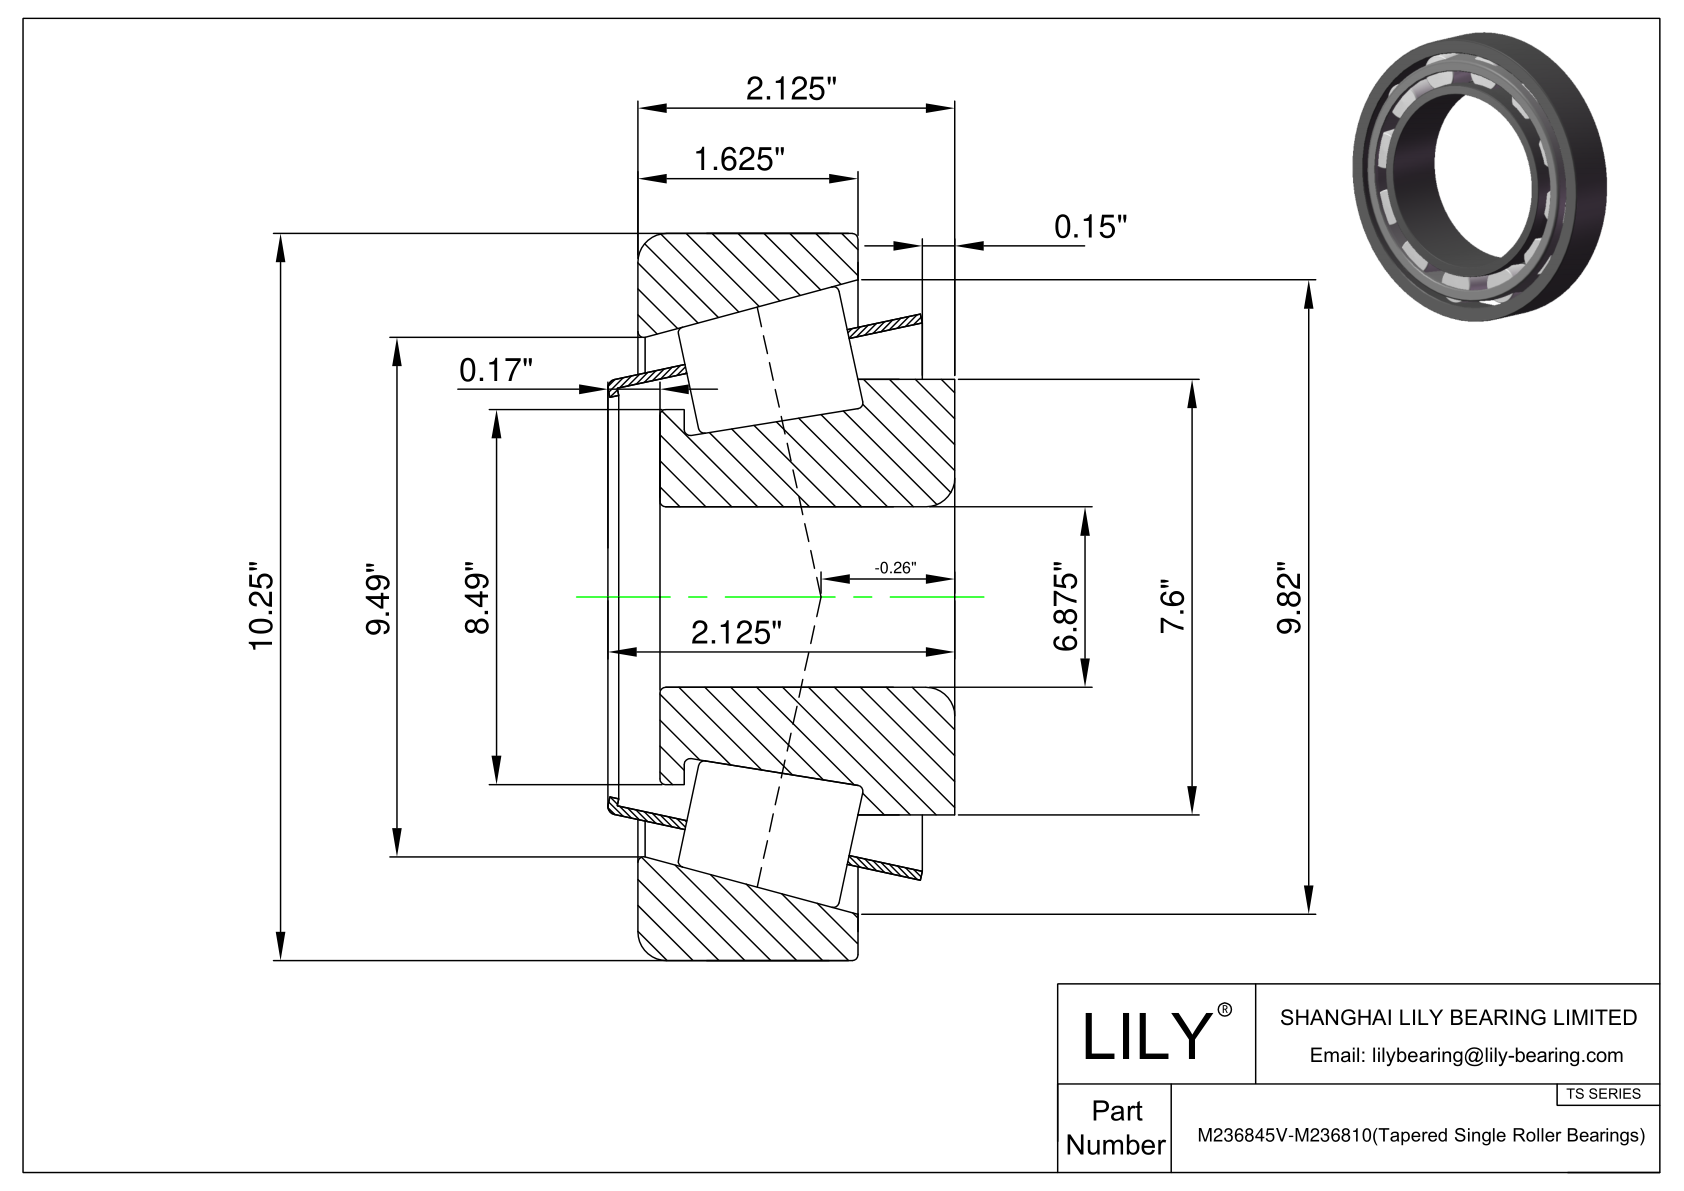 M236845V-M236810 TS (Tapered Single Roller Bearings) (Imperial) cad drawing